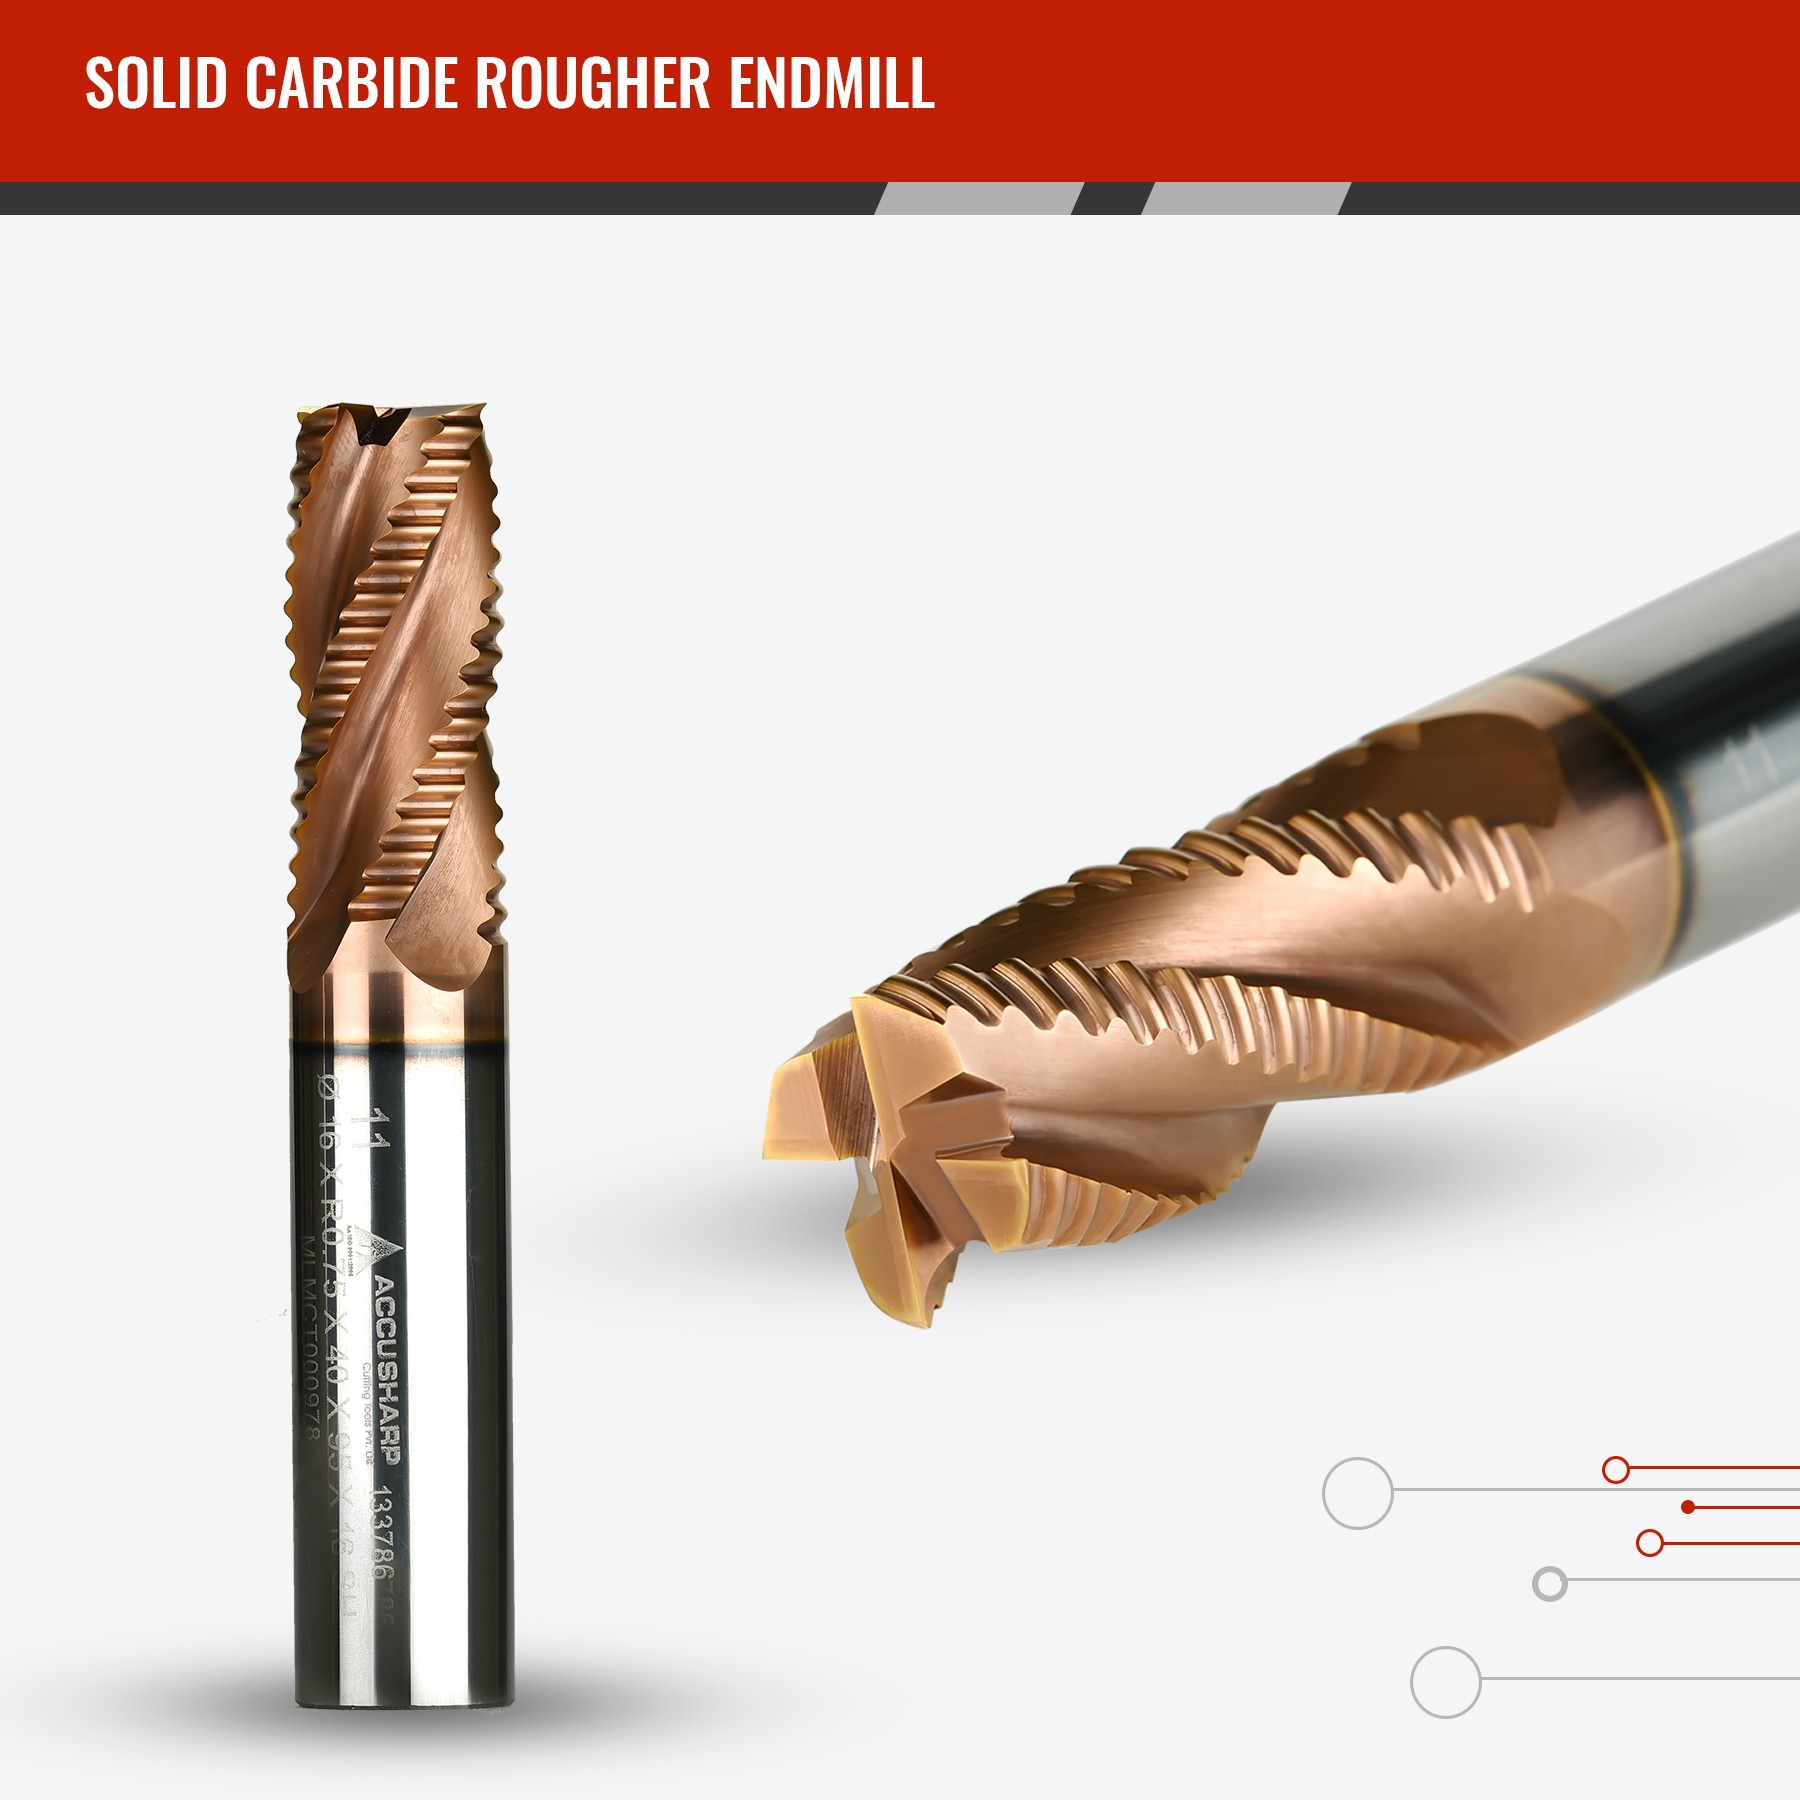 Solid carbide rougher end mill